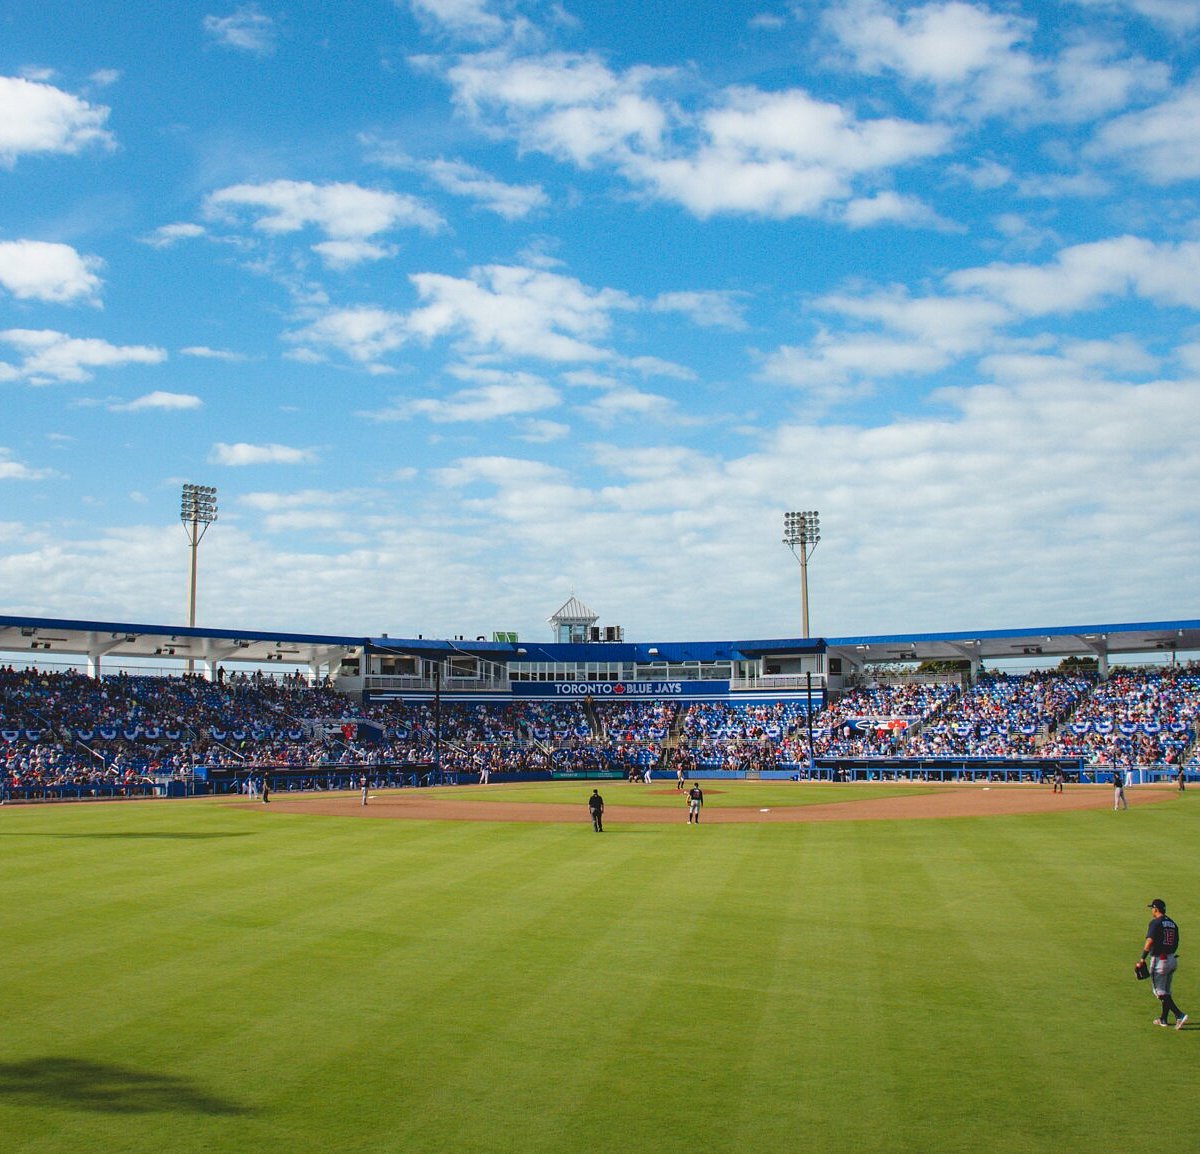 Welcome to TD Ballpark: The Spring Training Home of the Toronto Blue Jays